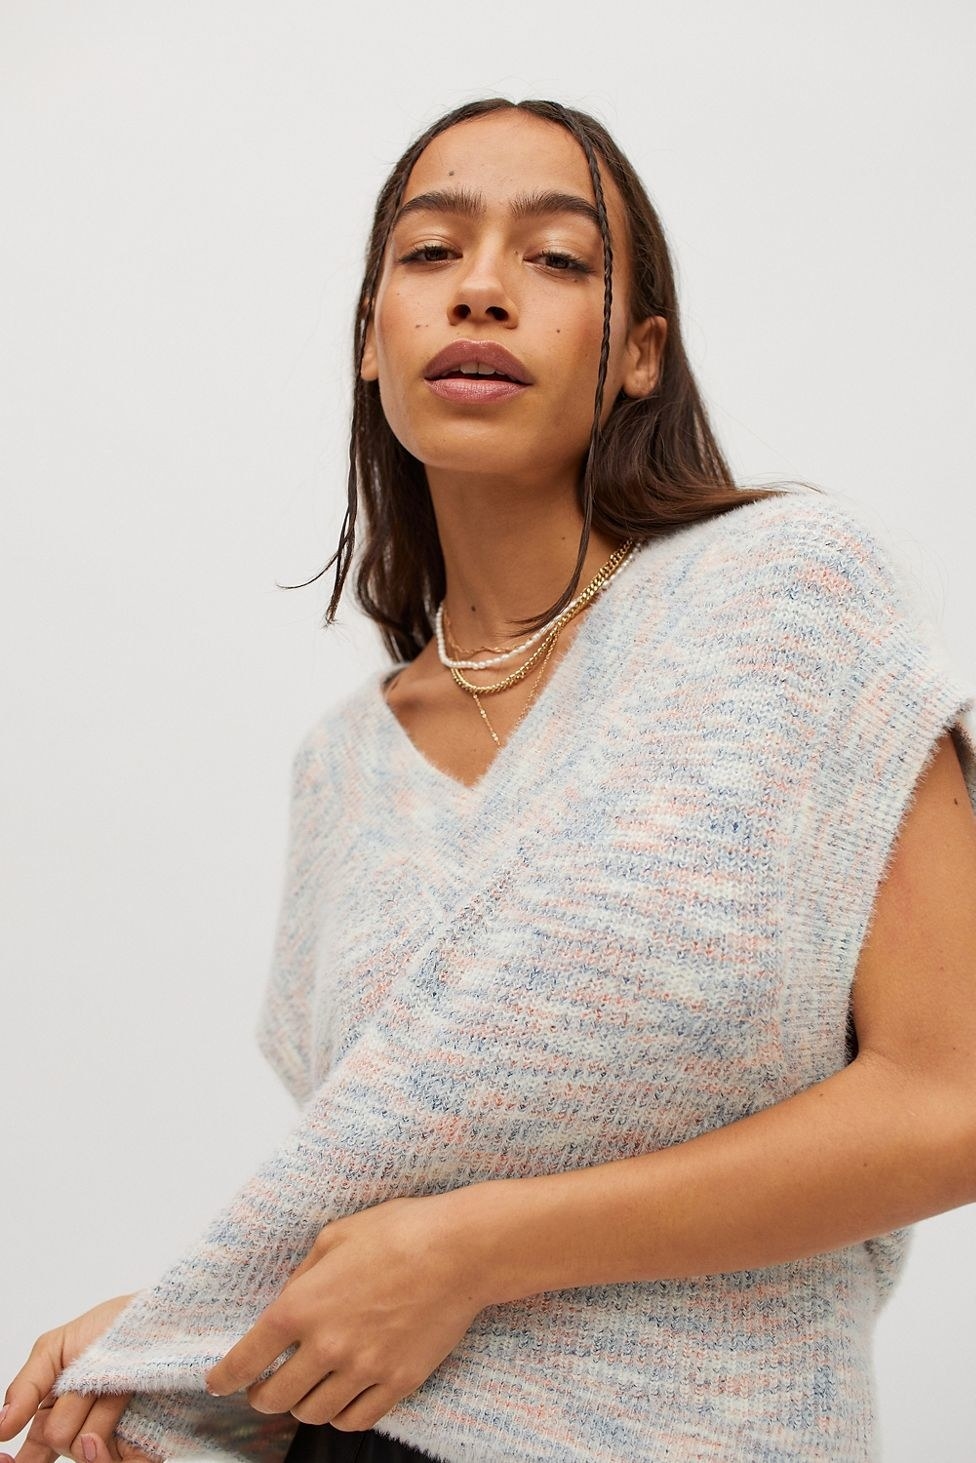 model in a light white, pink, and blue sweater vest